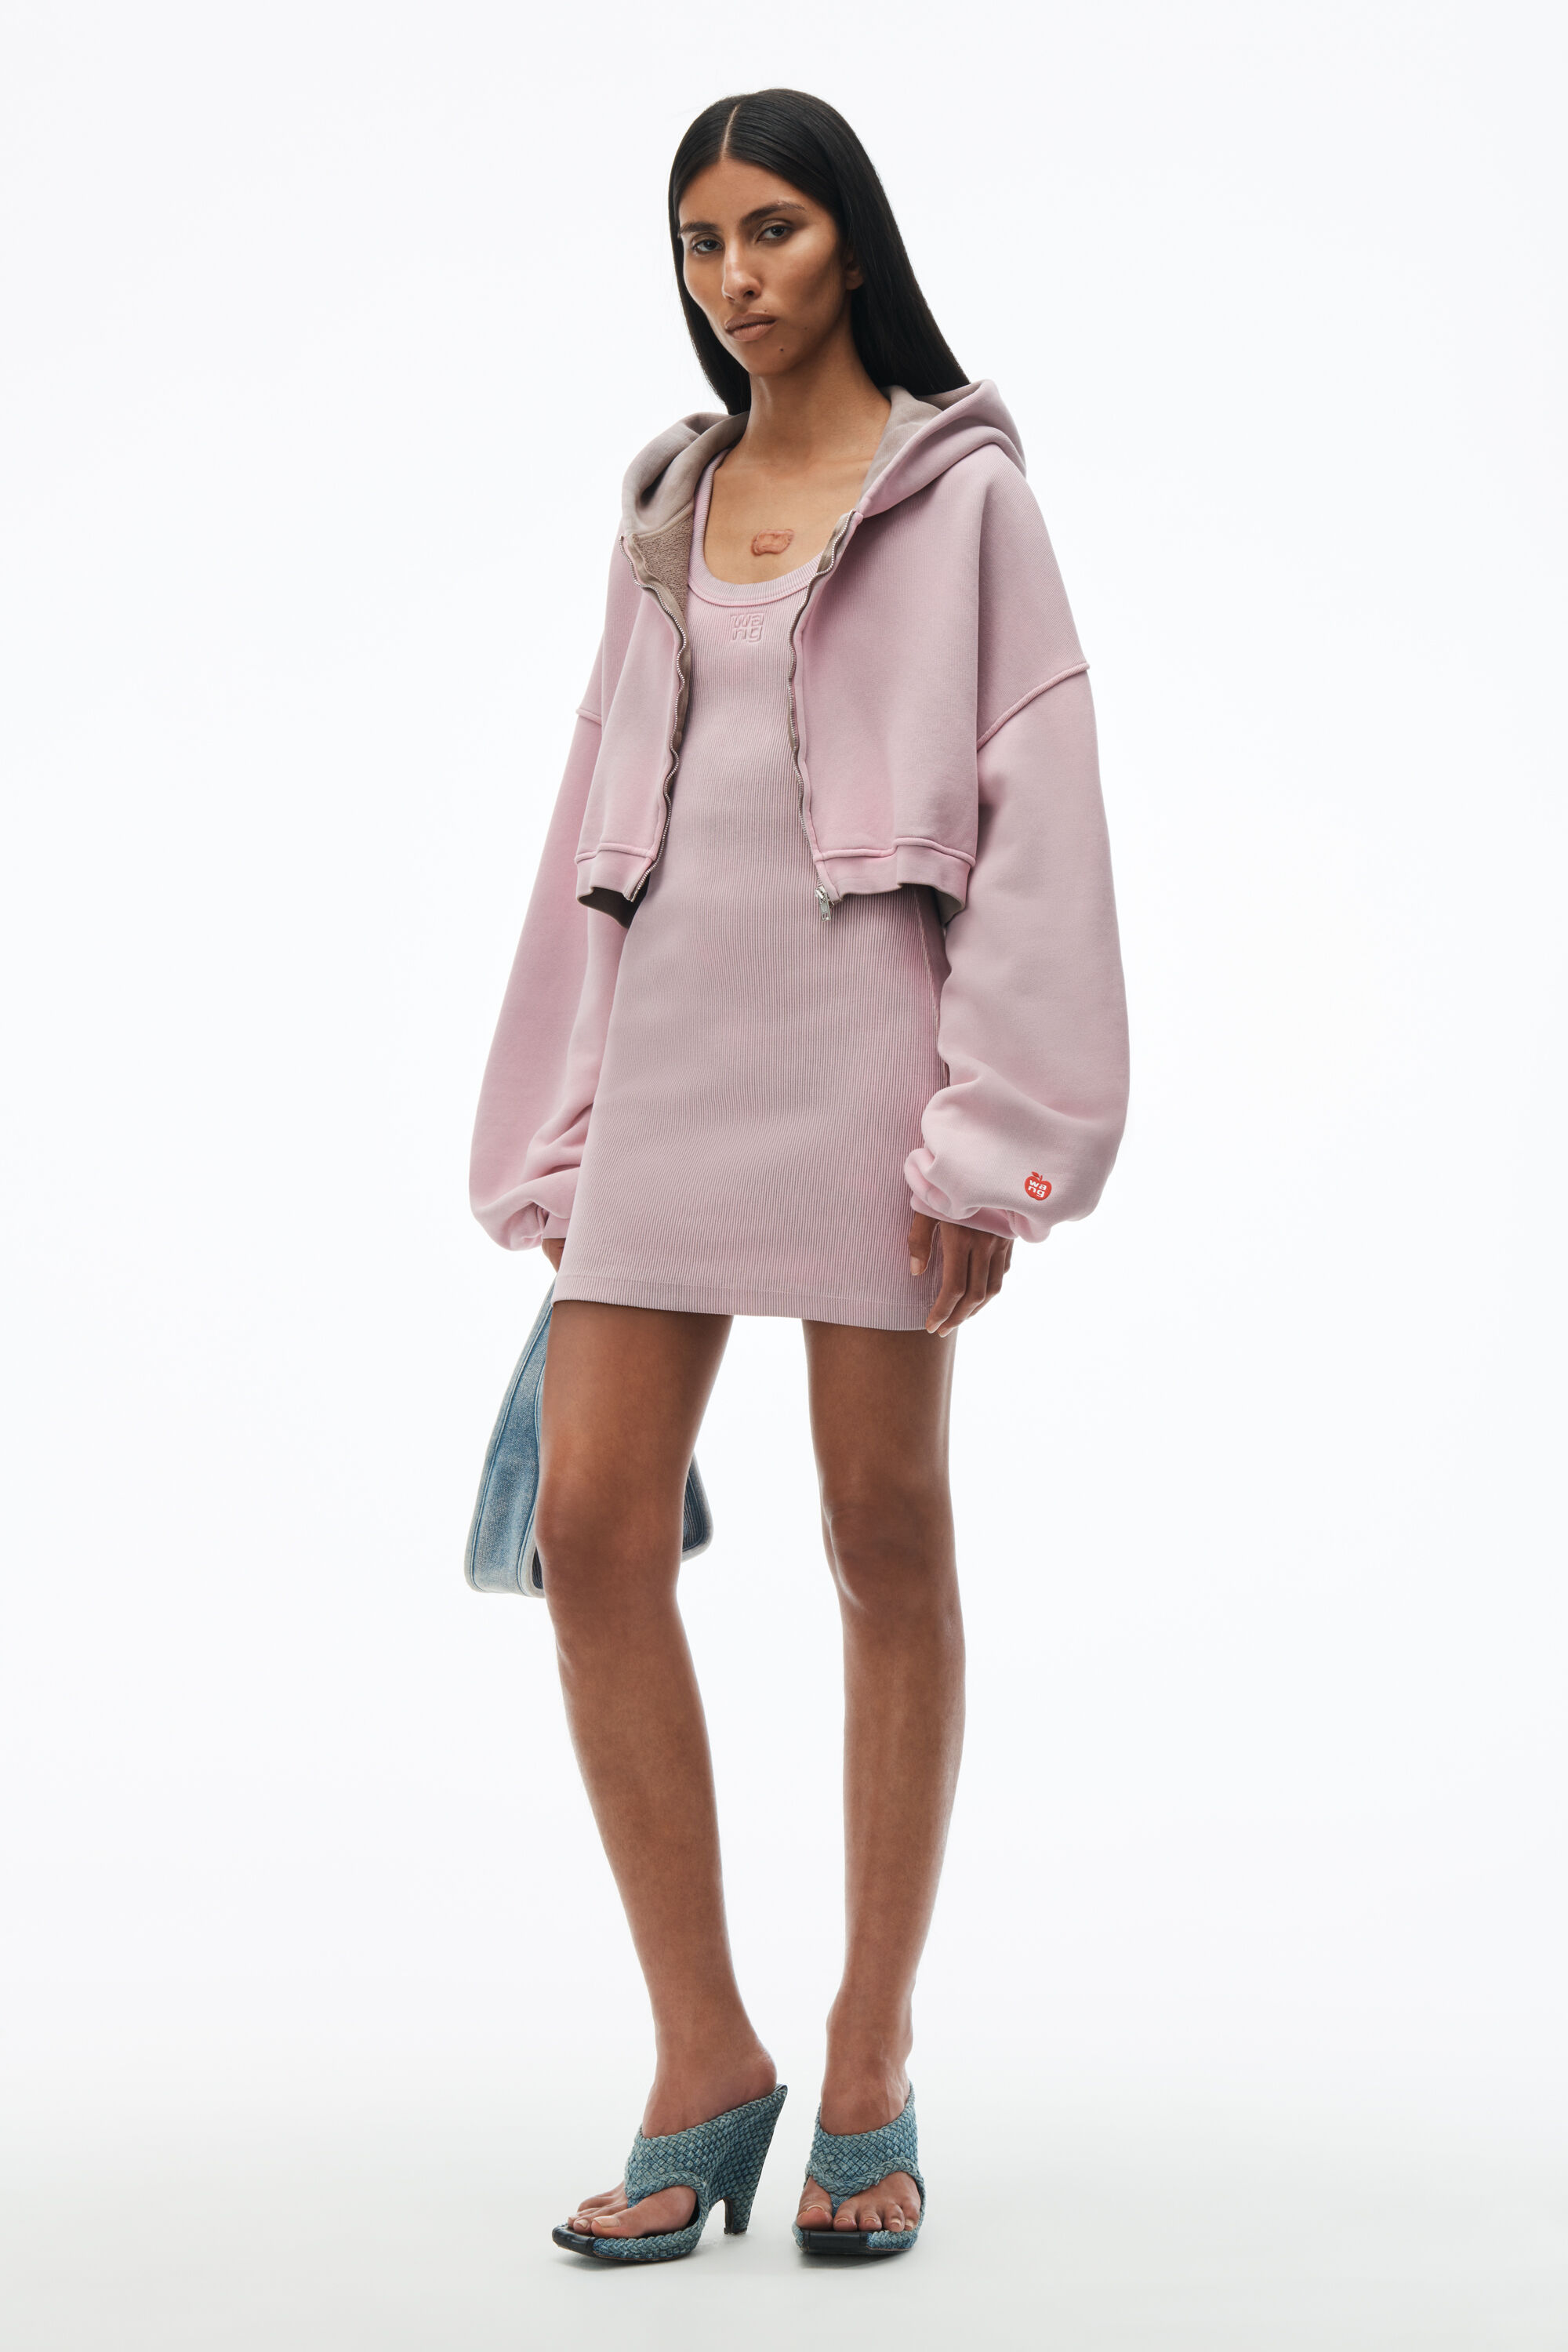 Crop Zip Up Hoodie in Classic Terry in WASHED PINK LACE 